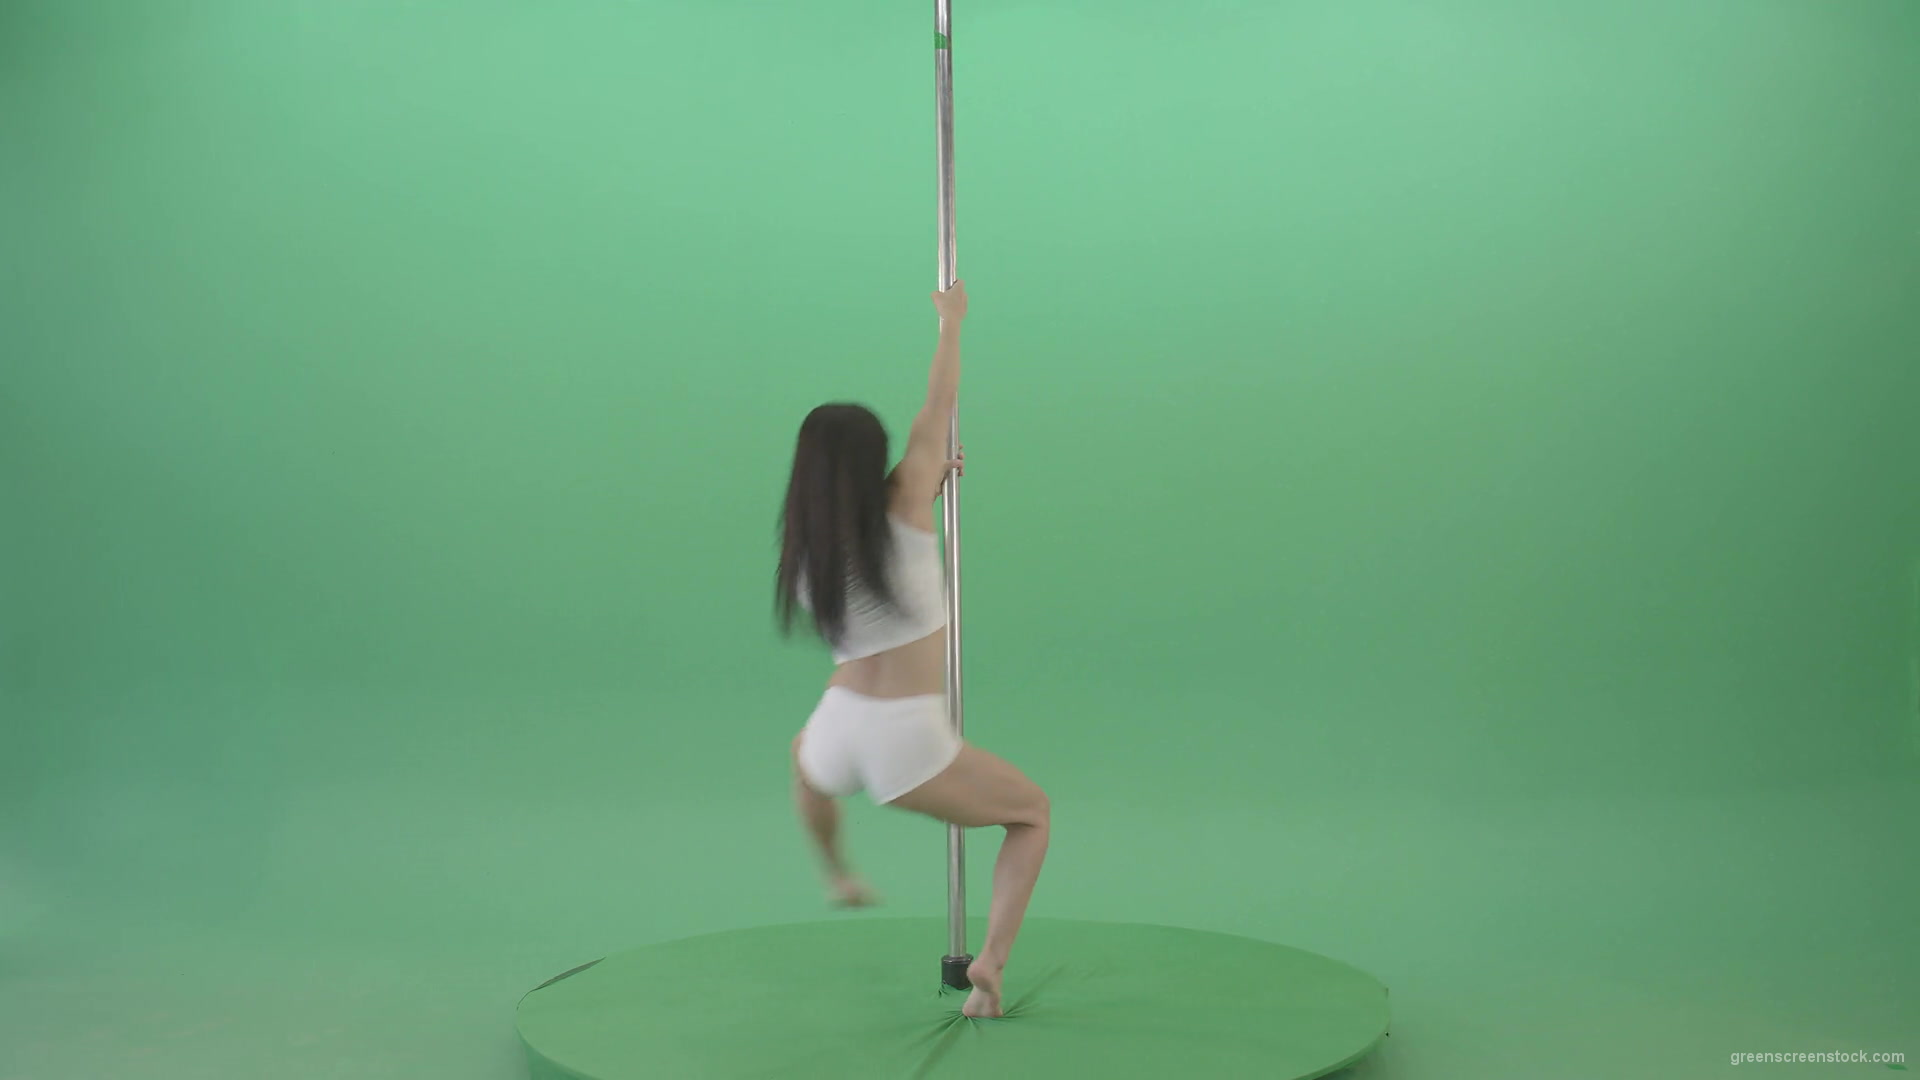 Dark-Hair-Girl-in-White-body-dress-underwear-spinning-on-the-pilon-showing-exotic-dance-over-green-screen-4K-Video-Footage-1920_002 Green Screen Stock